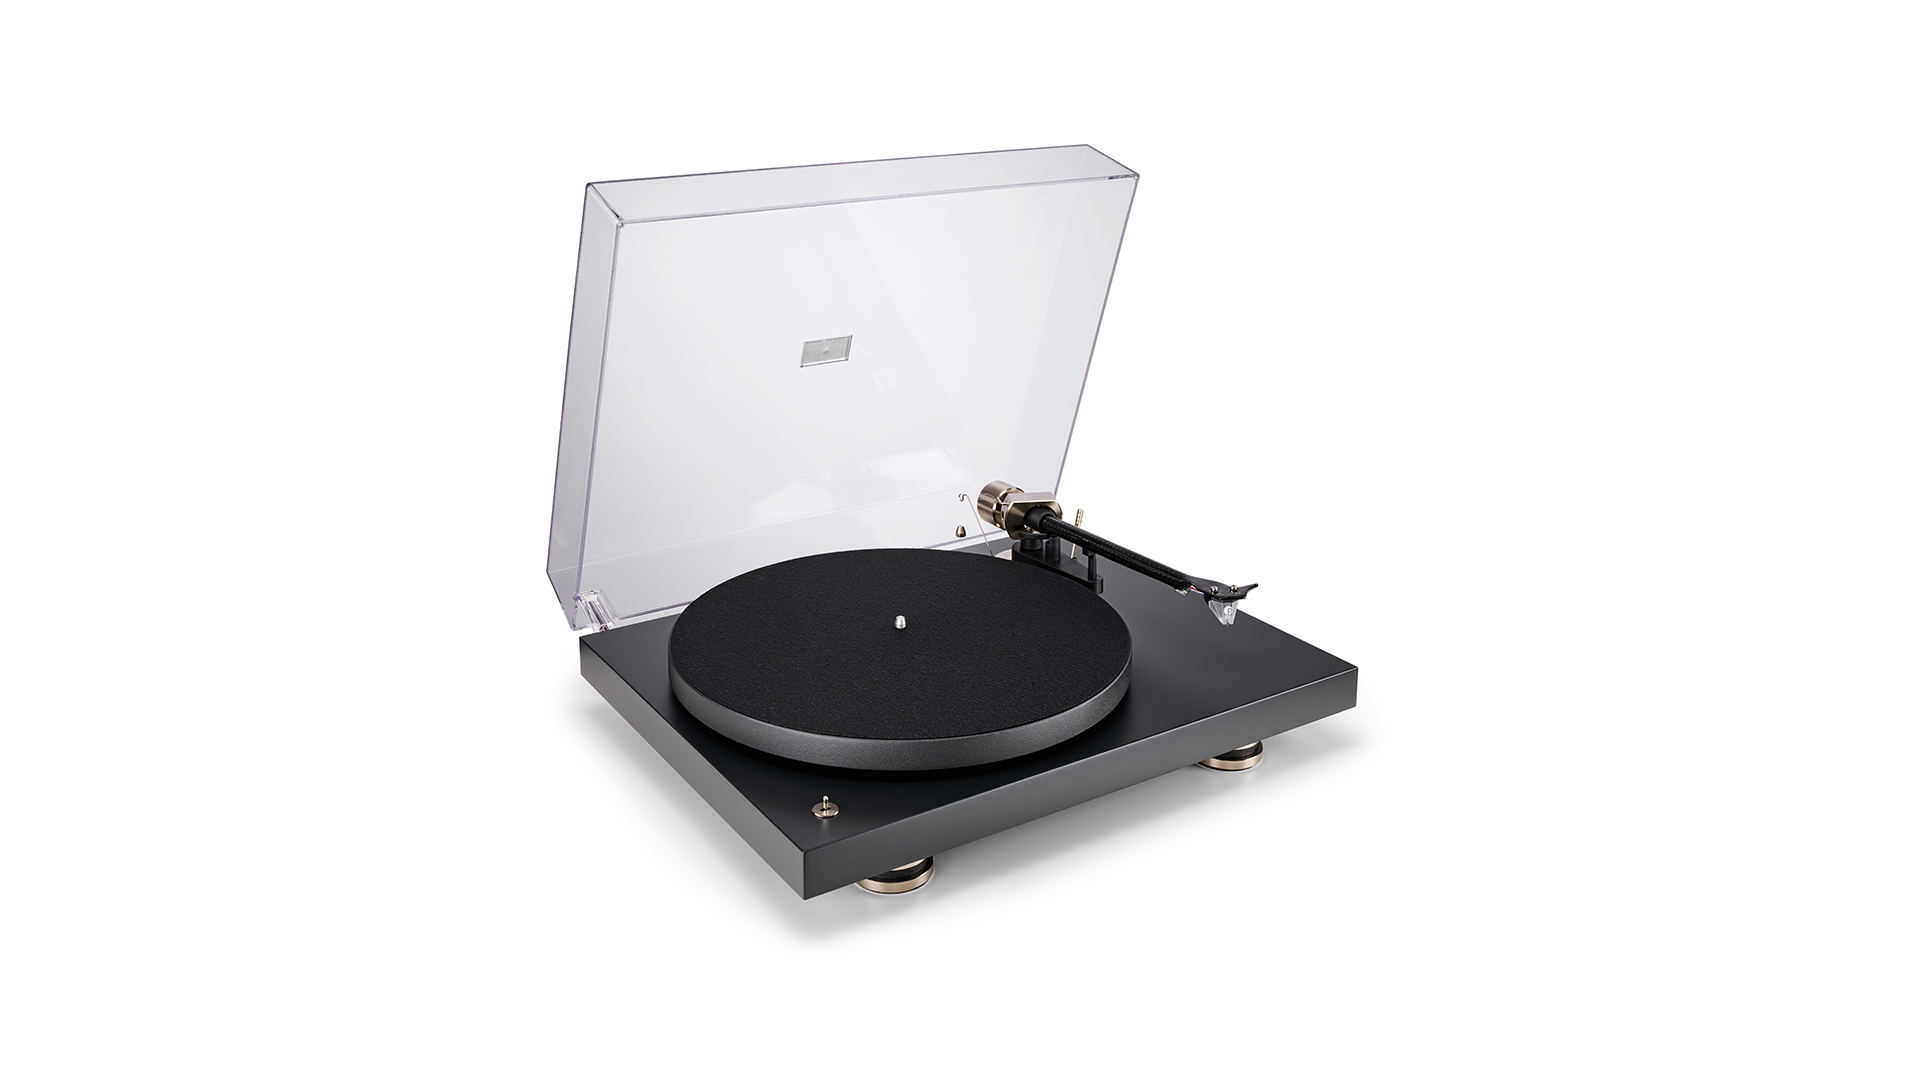 Pro-Ject releases Debut Pro turntable to celebrate 30th anniversary